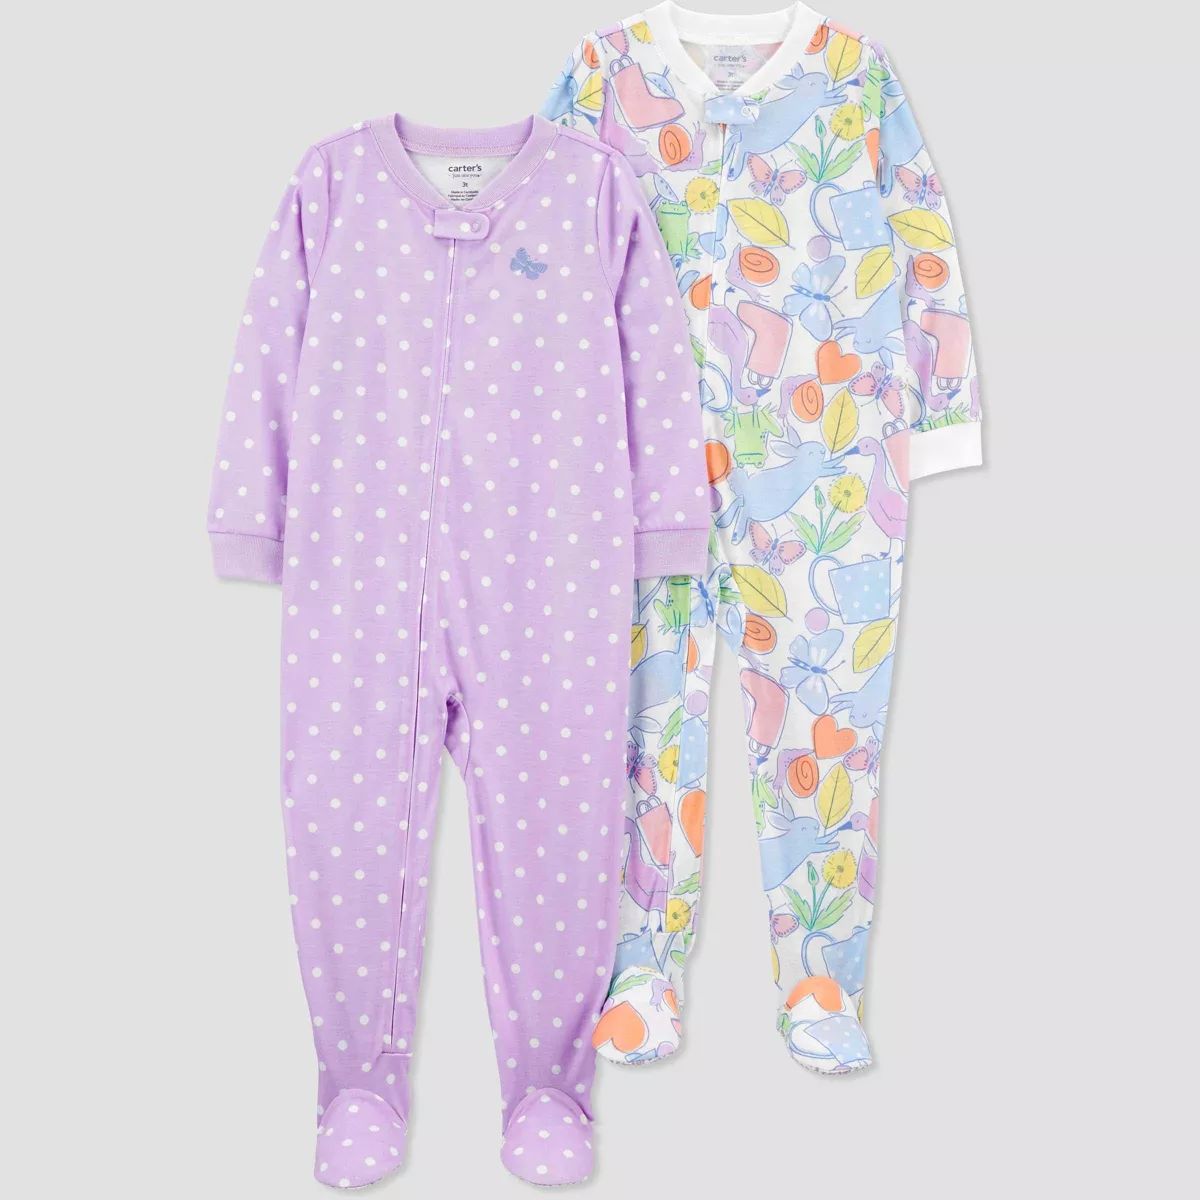 Carter's Just One You® Toddler Girls' Polka Dots & Floral Printed Footed Pajamas - Purple/White | Target